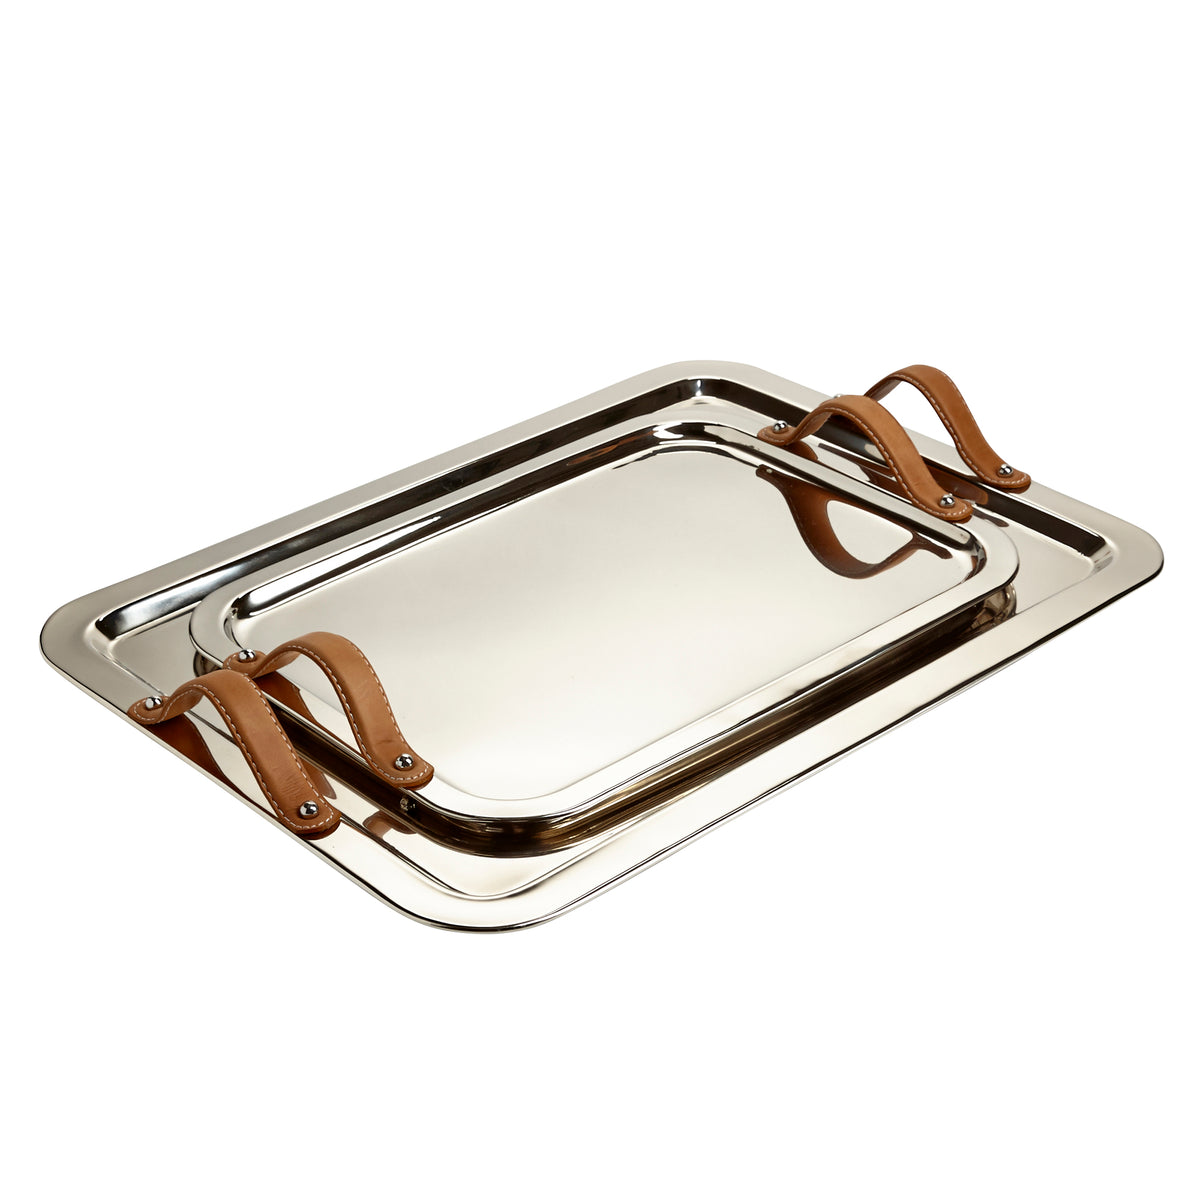 Medium Tray with Leather Handles